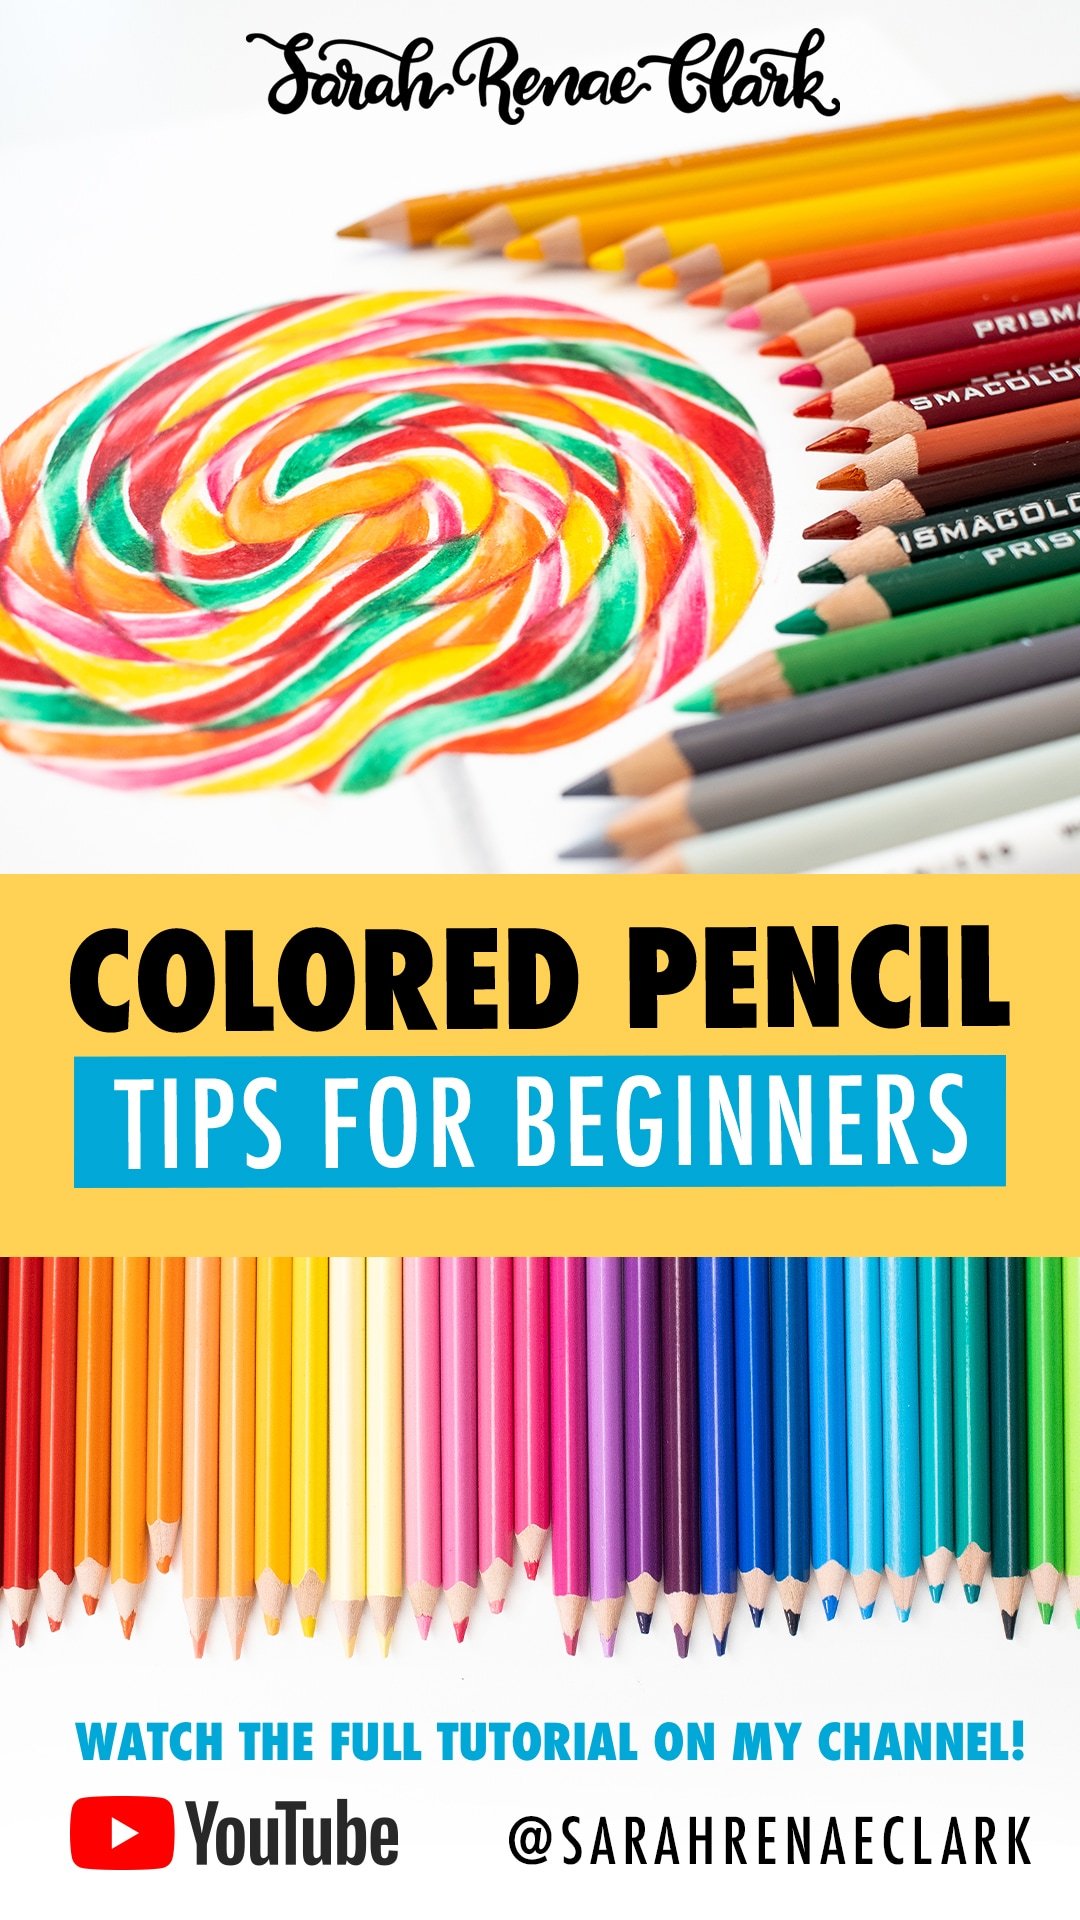 How To Use Colored Pencils In Adult Coloring Pages 10 Tips For Beginners Sarah Renae Clark Coloring Book Artist And Designer